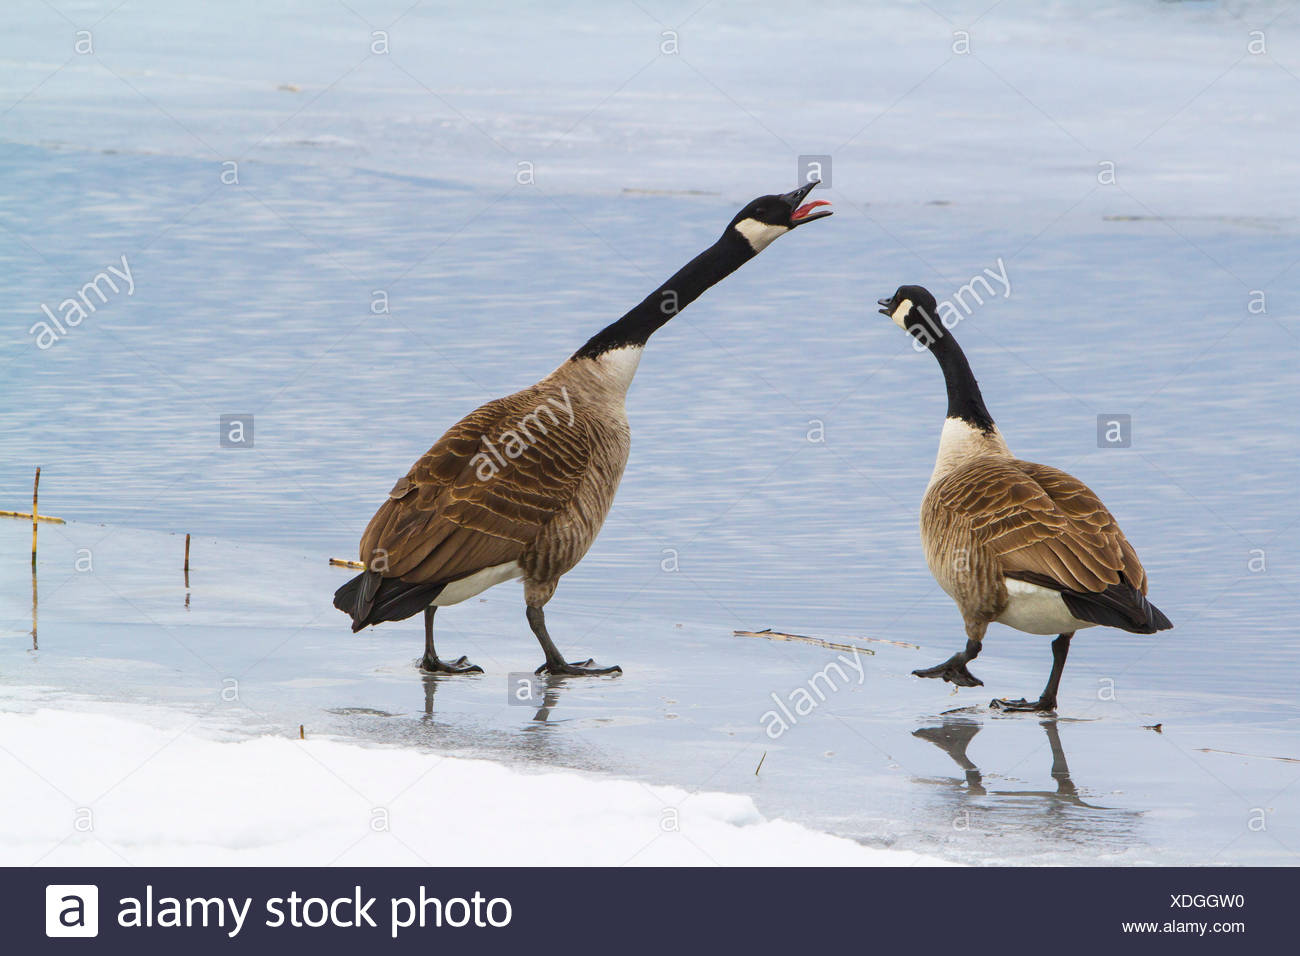 Canada goose (Branta canadensis), two Canada geese on frozen surface of a  lake, Sweden, Hamra National Park Stock Photo - Alamy